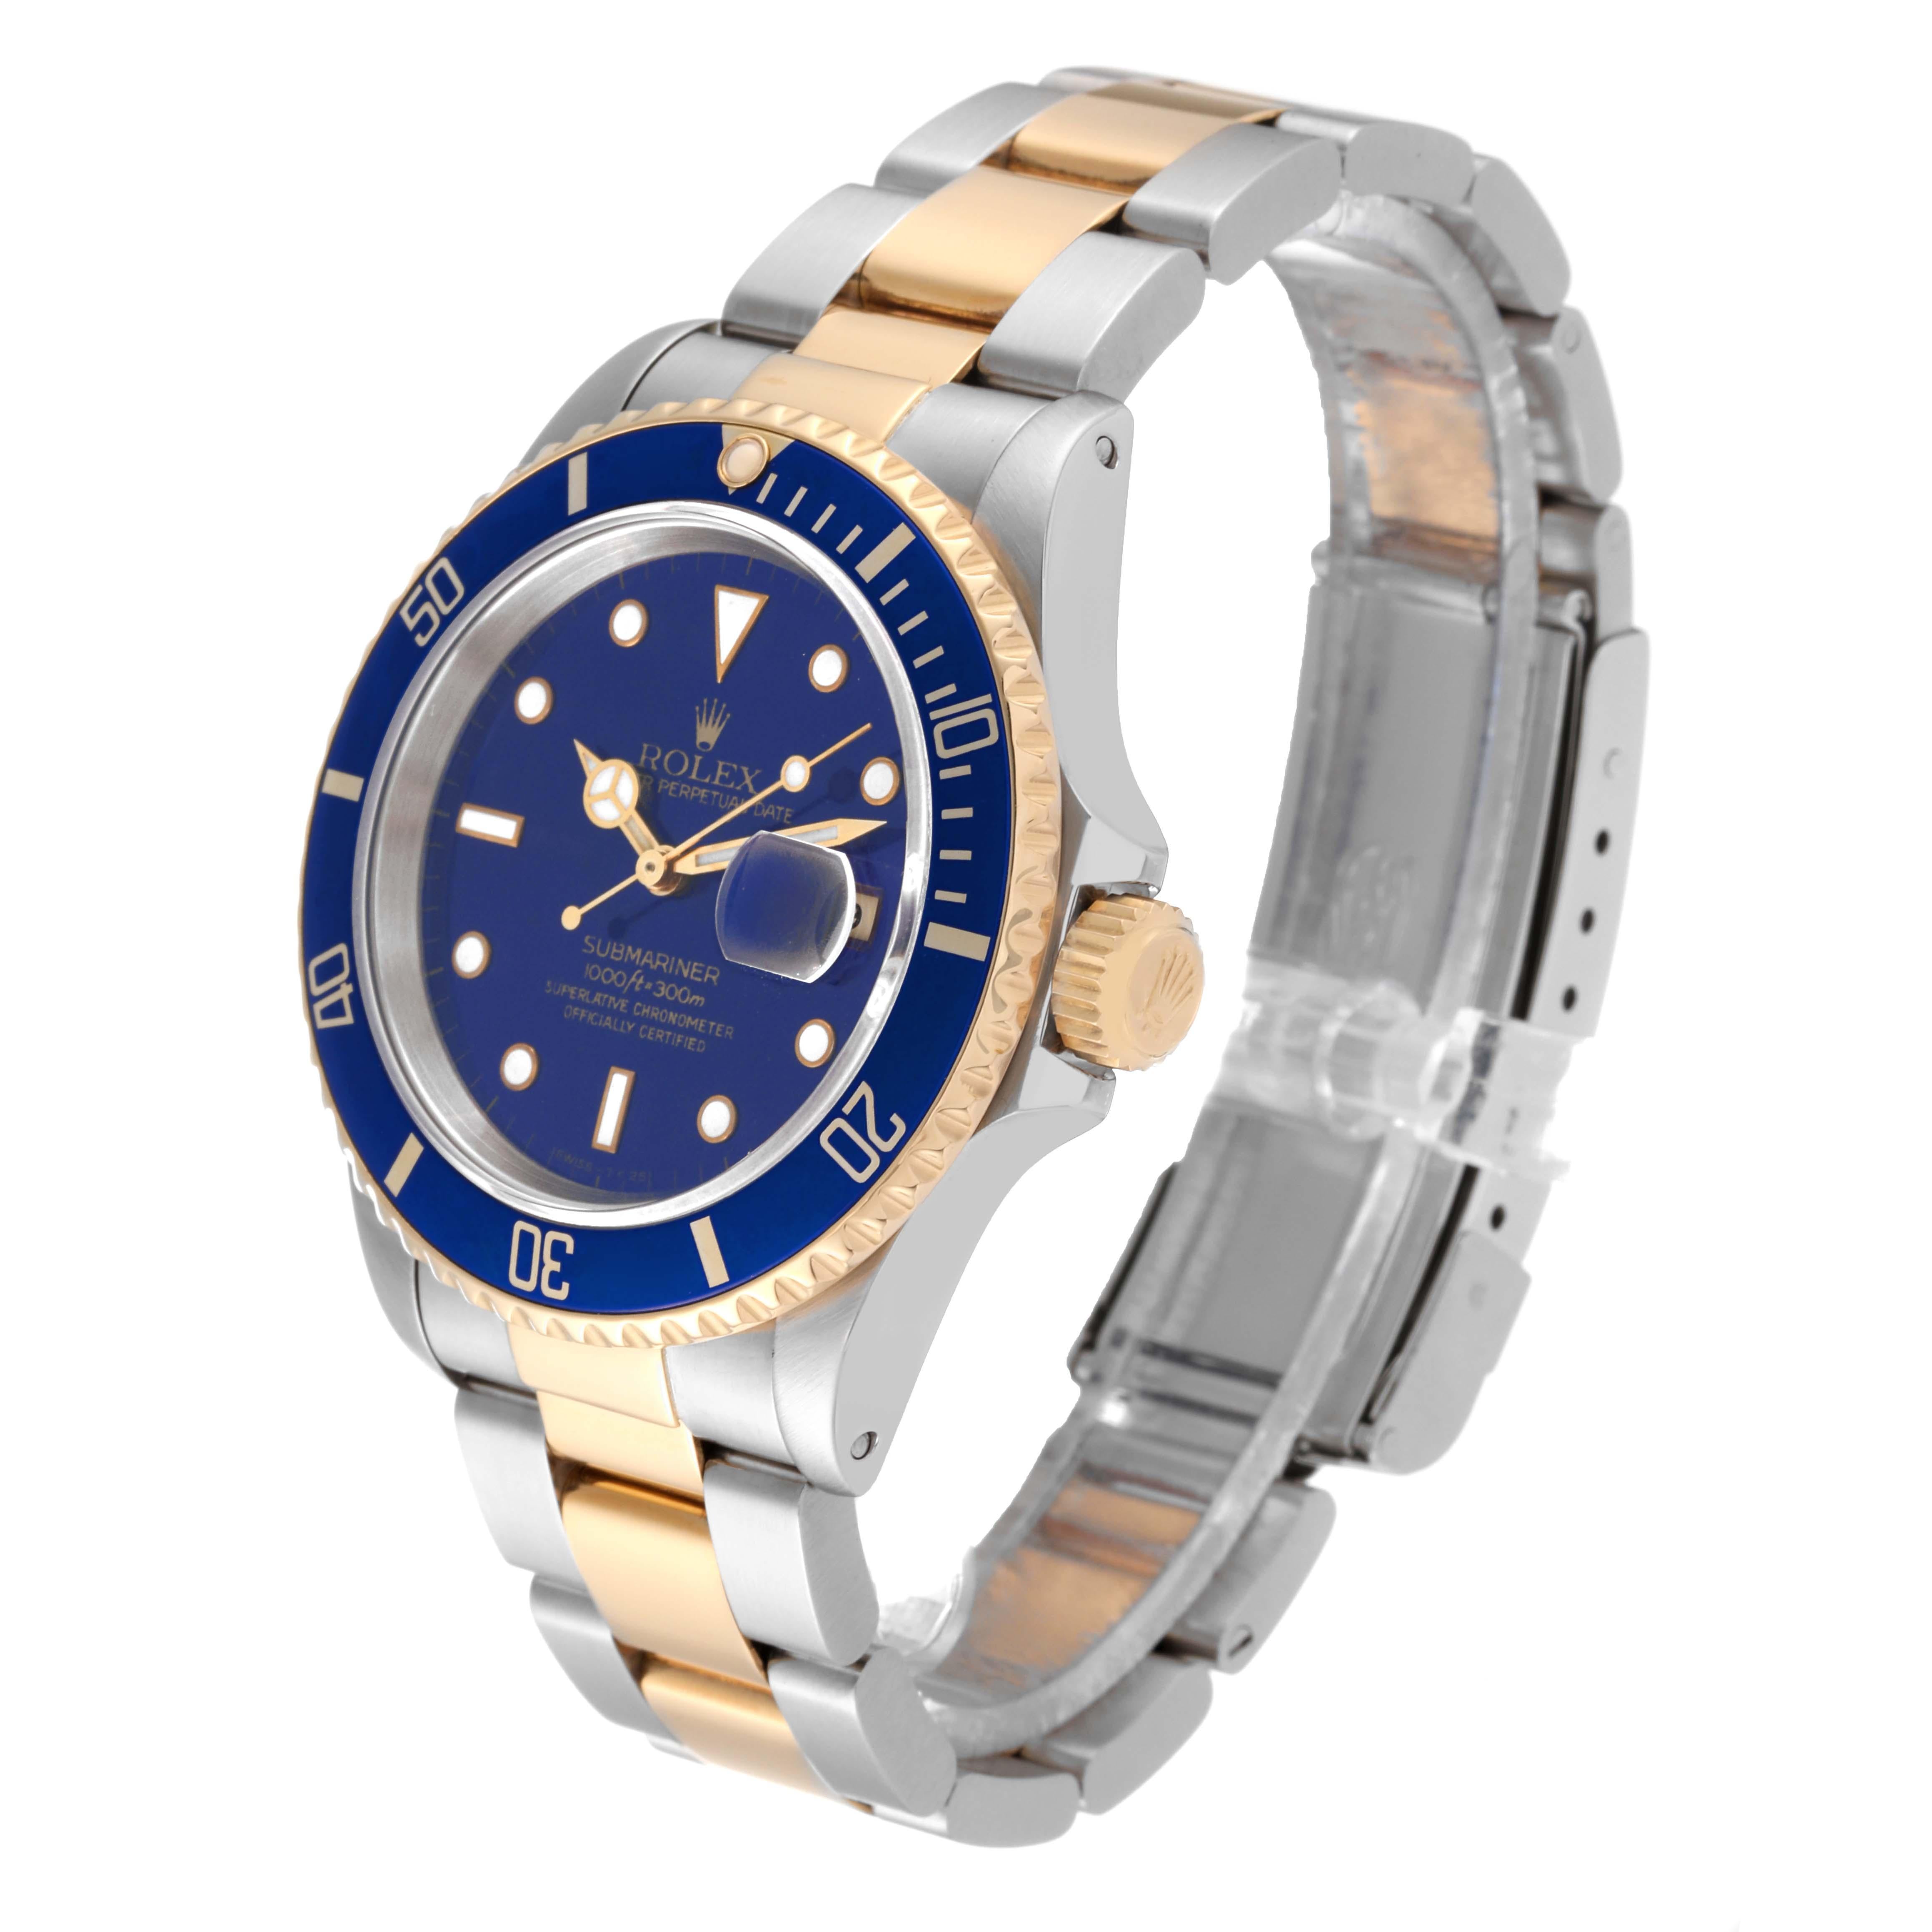 Rolex Submariner Blue Dial Steel Yellow Gold Mens Watch 16613 6